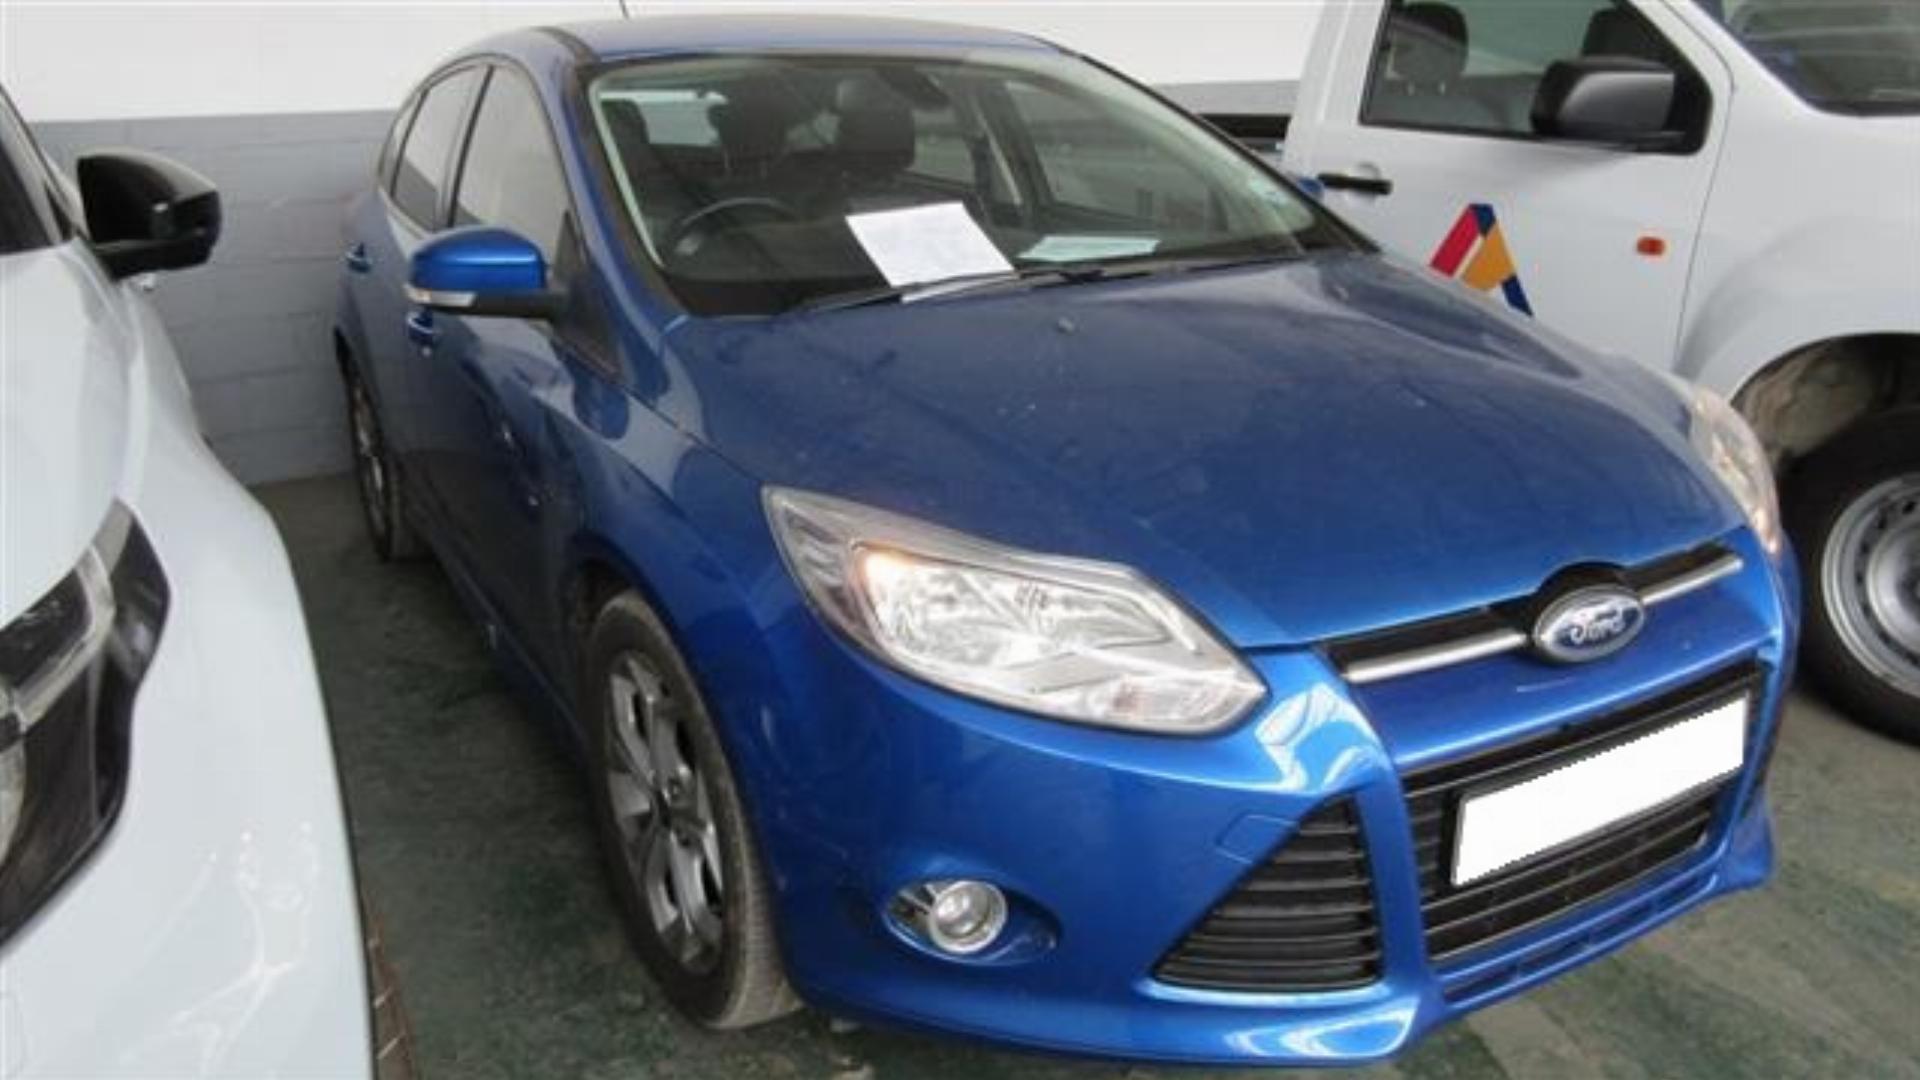 Ford Focus 1.6 Trend 5DR